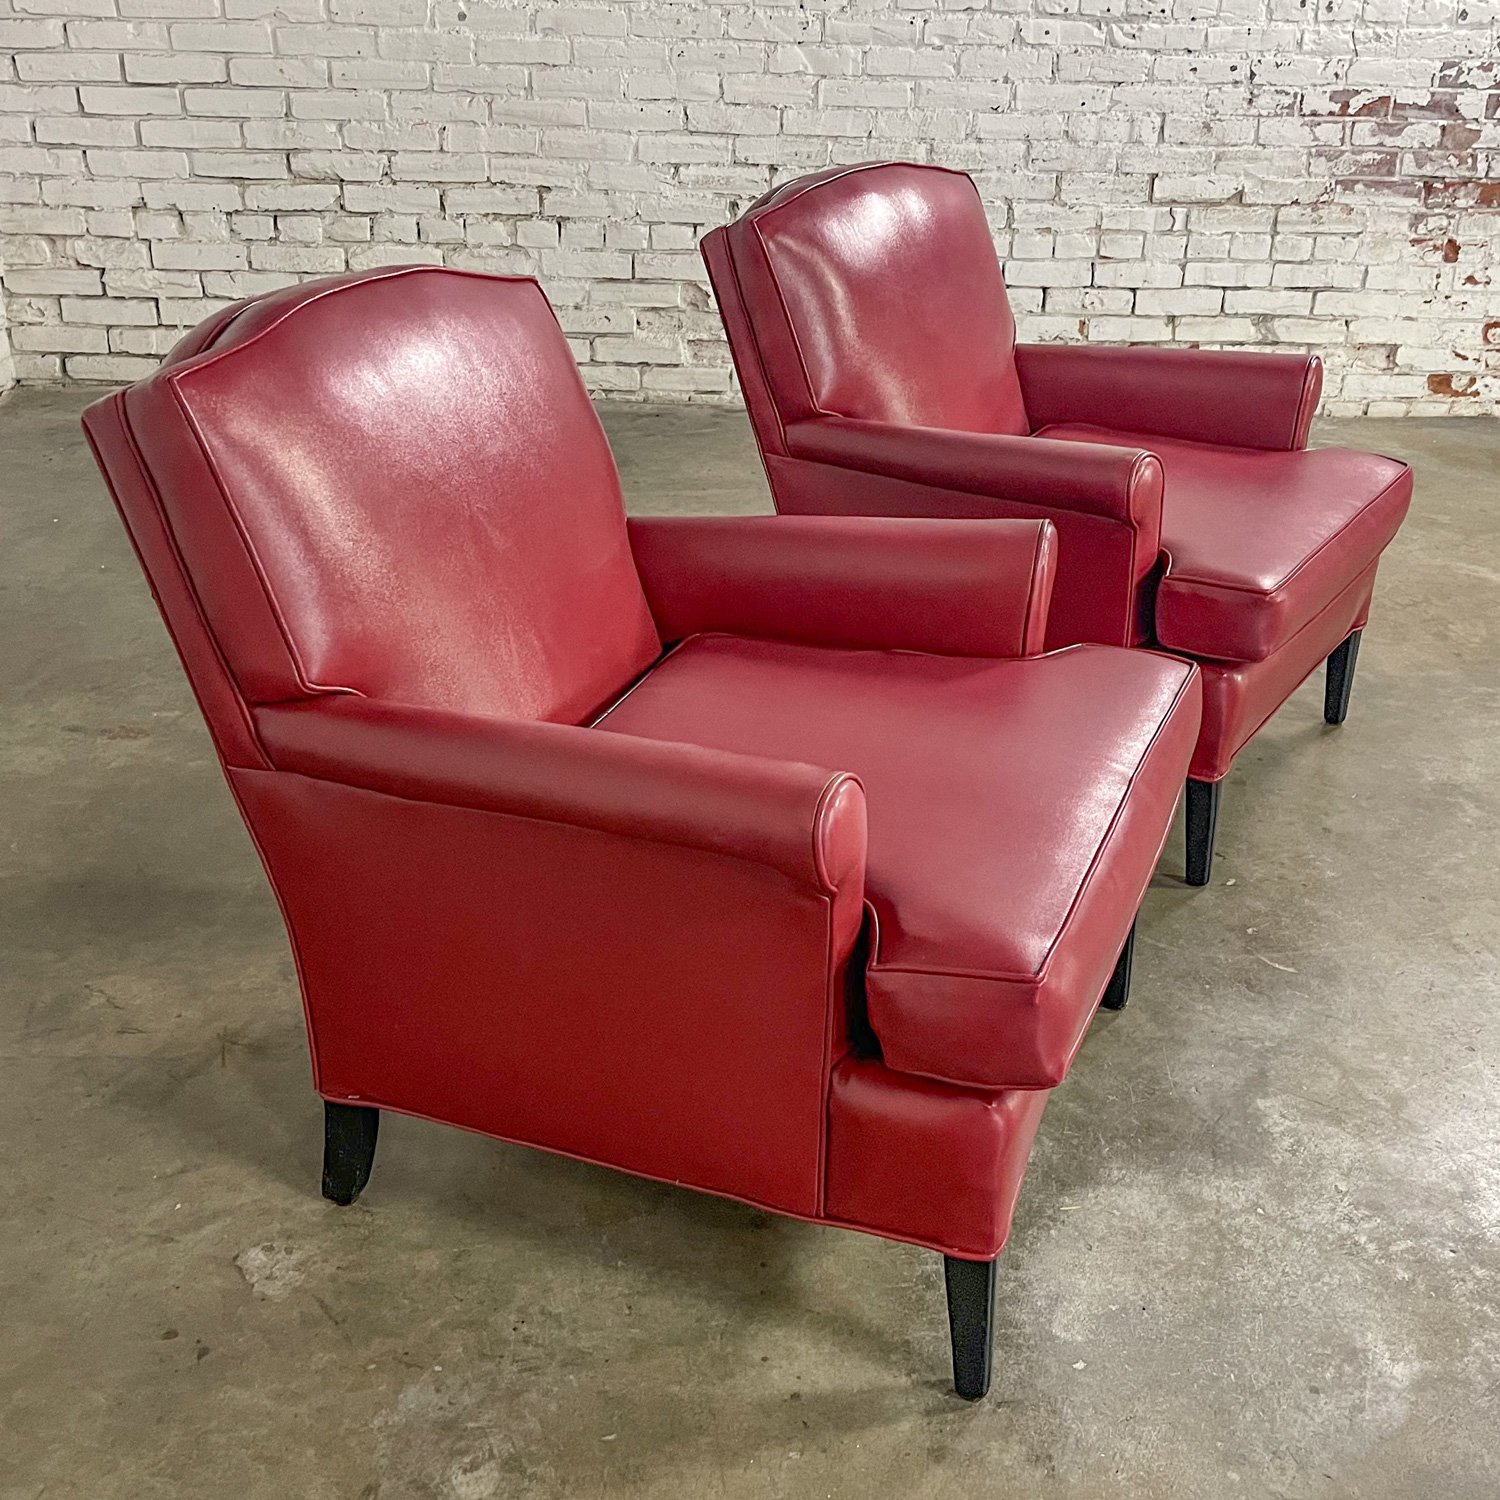 1940’s Traditional Club Chairs Original Red Faux Leather & Wood Legs a Pair